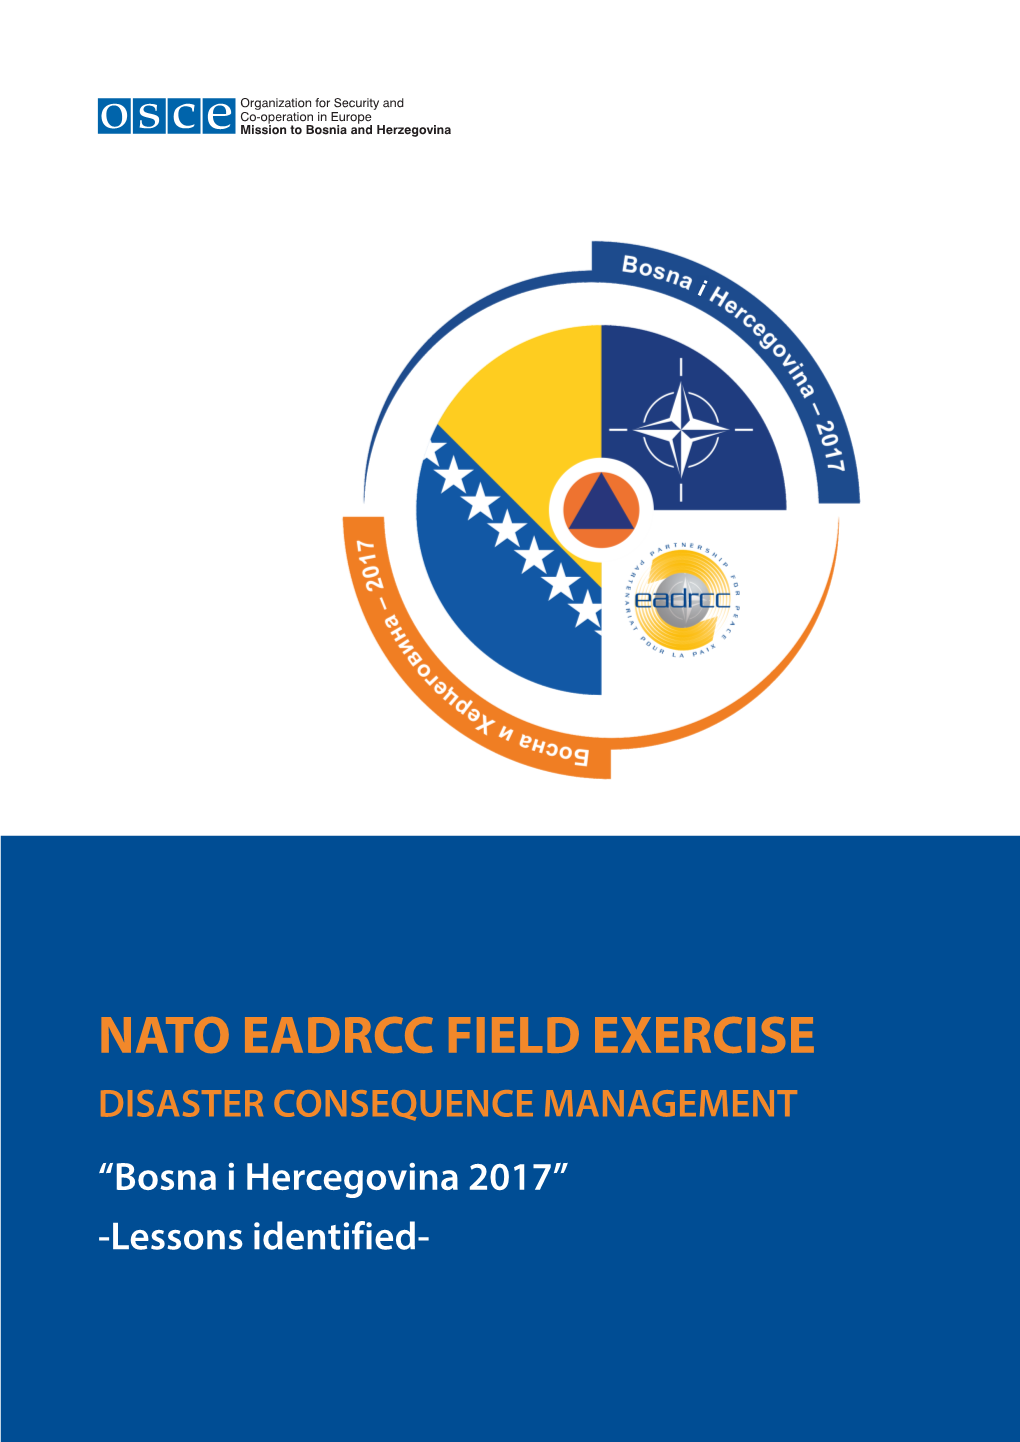 NATO EADRCC FIELD EXERCISE DISASTER CONSEQUENCE MANAGEMENT “Bosna I Hercegovina 2017” -Lessons Identified